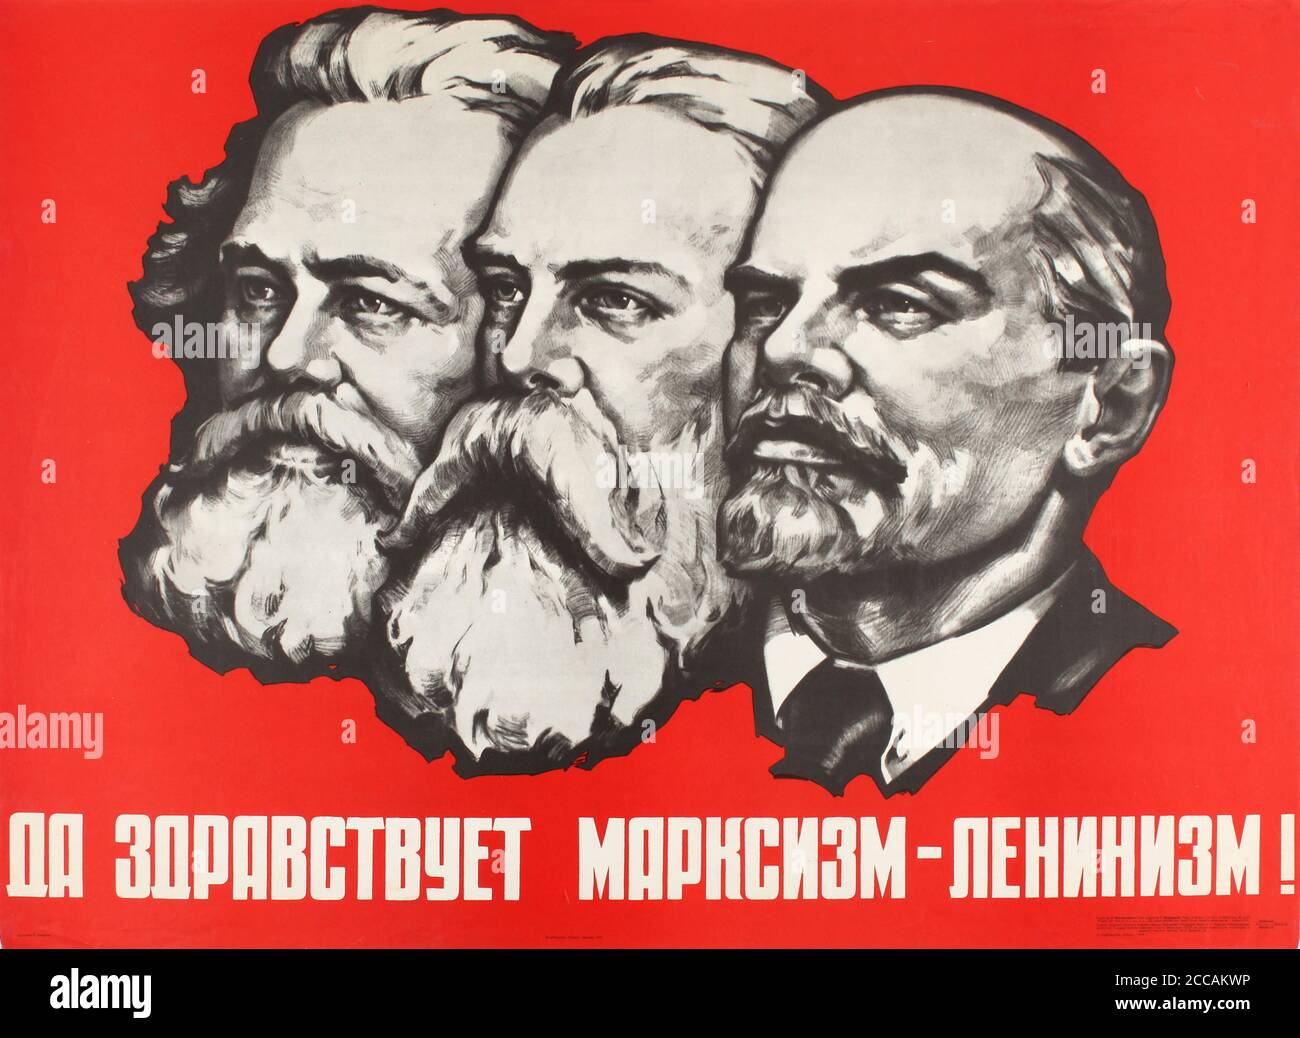 Long live Marxism - Leninism!. Museum: PRIVATE COLLECTION. Author: ANONYMOUS. Stock Photo